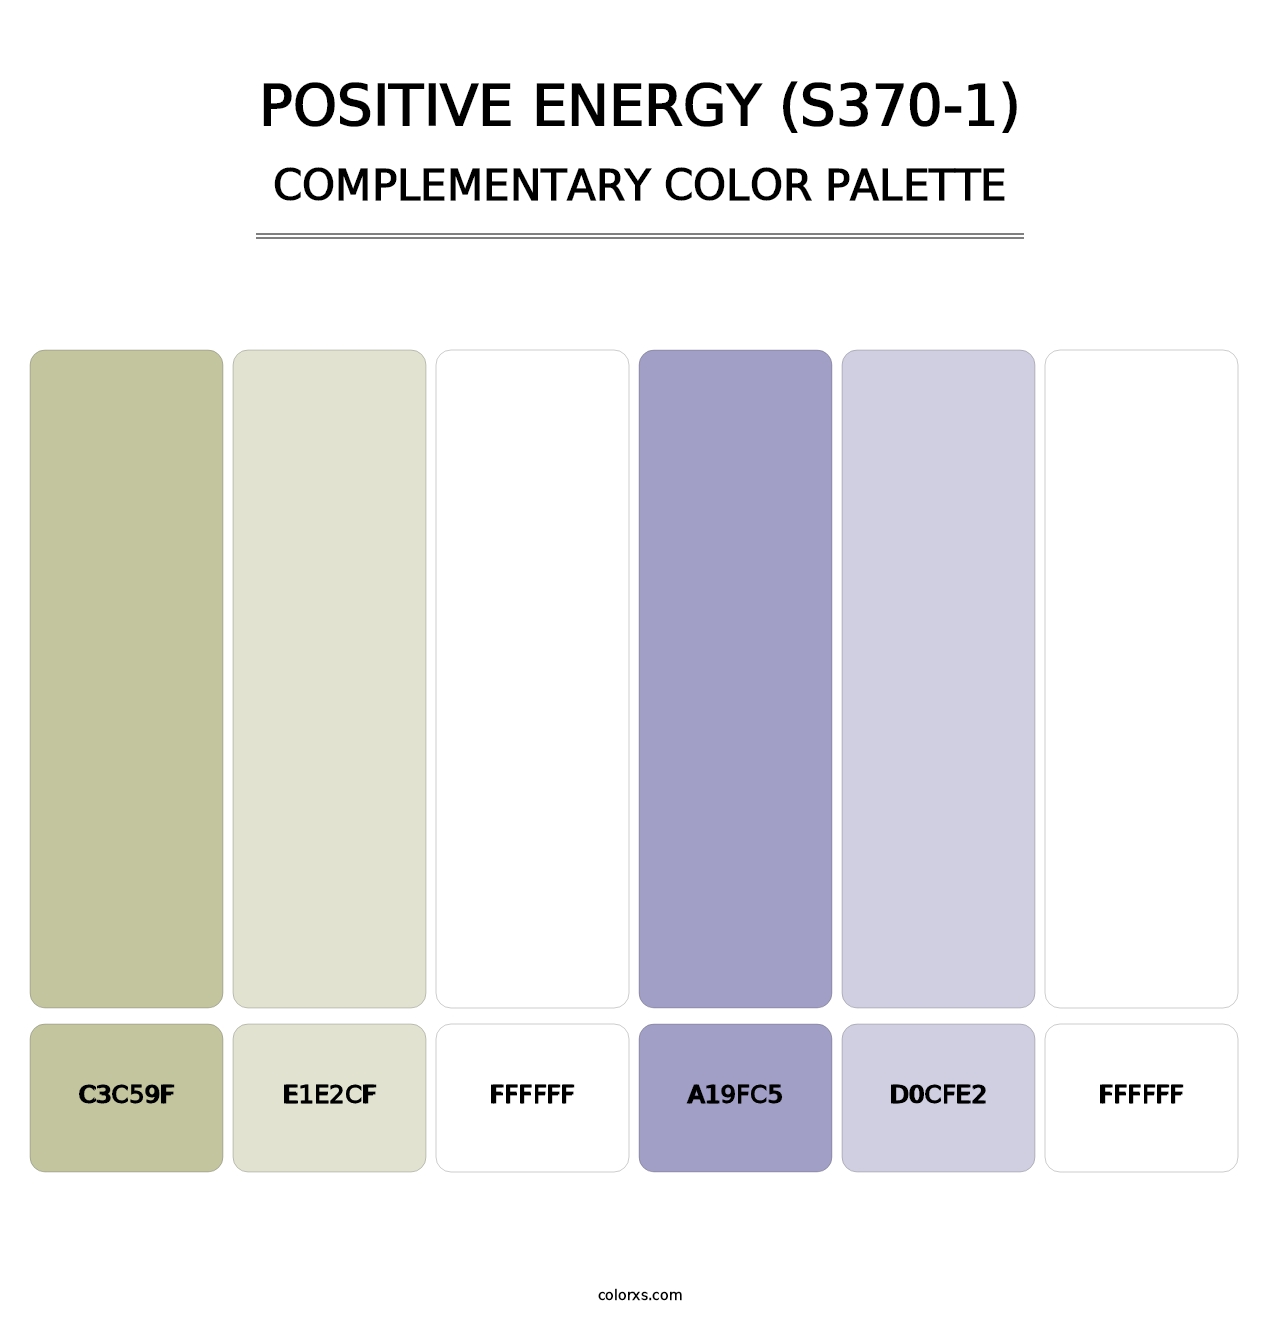 Positive Energy (S370-1) - Complementary Color Palette